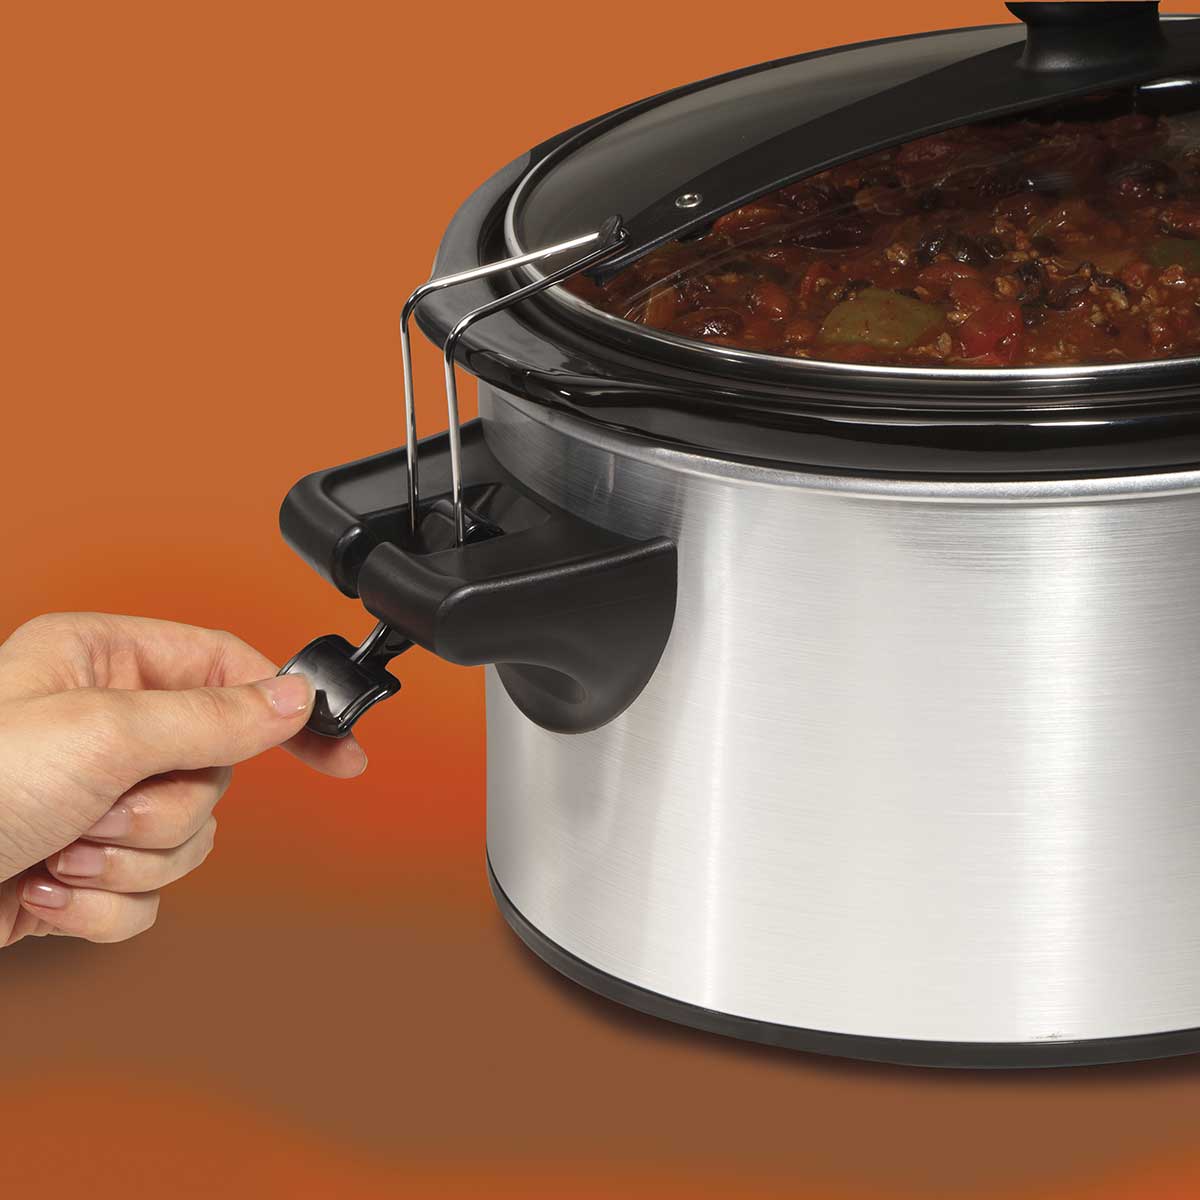 Hamilton Beach 6 Qt Stay Or Go Slow Cooker - 33261